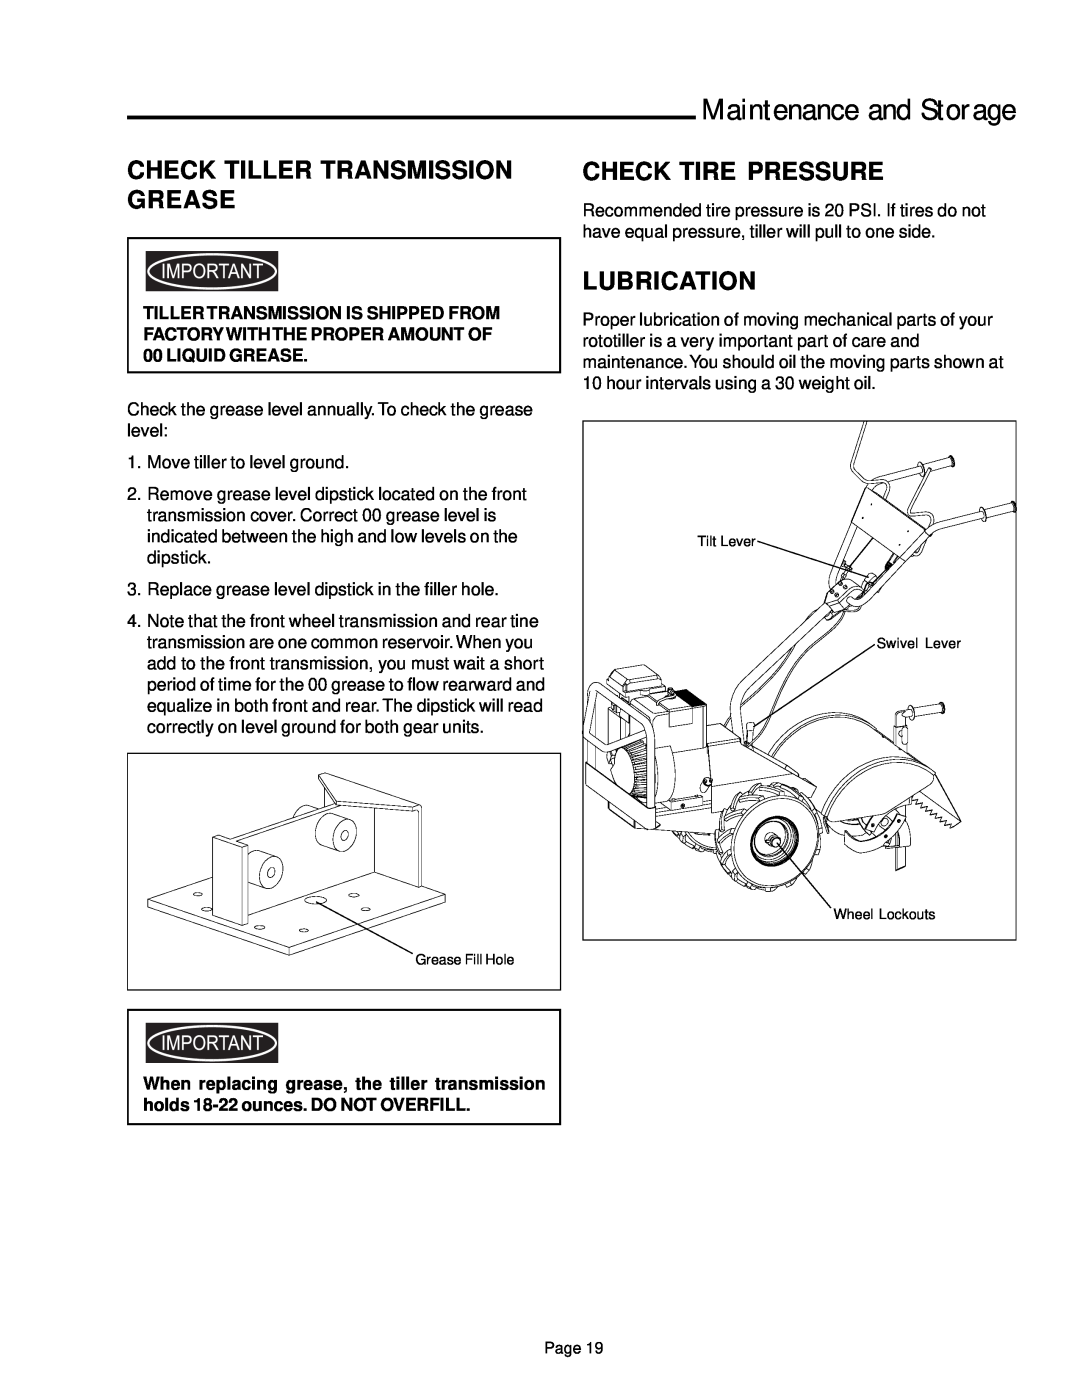 Simplicity 1693207, 1693705 Check Tiller Transmission Grease, Check Tire Pressure, Lubrication, Maintenance and Storage 